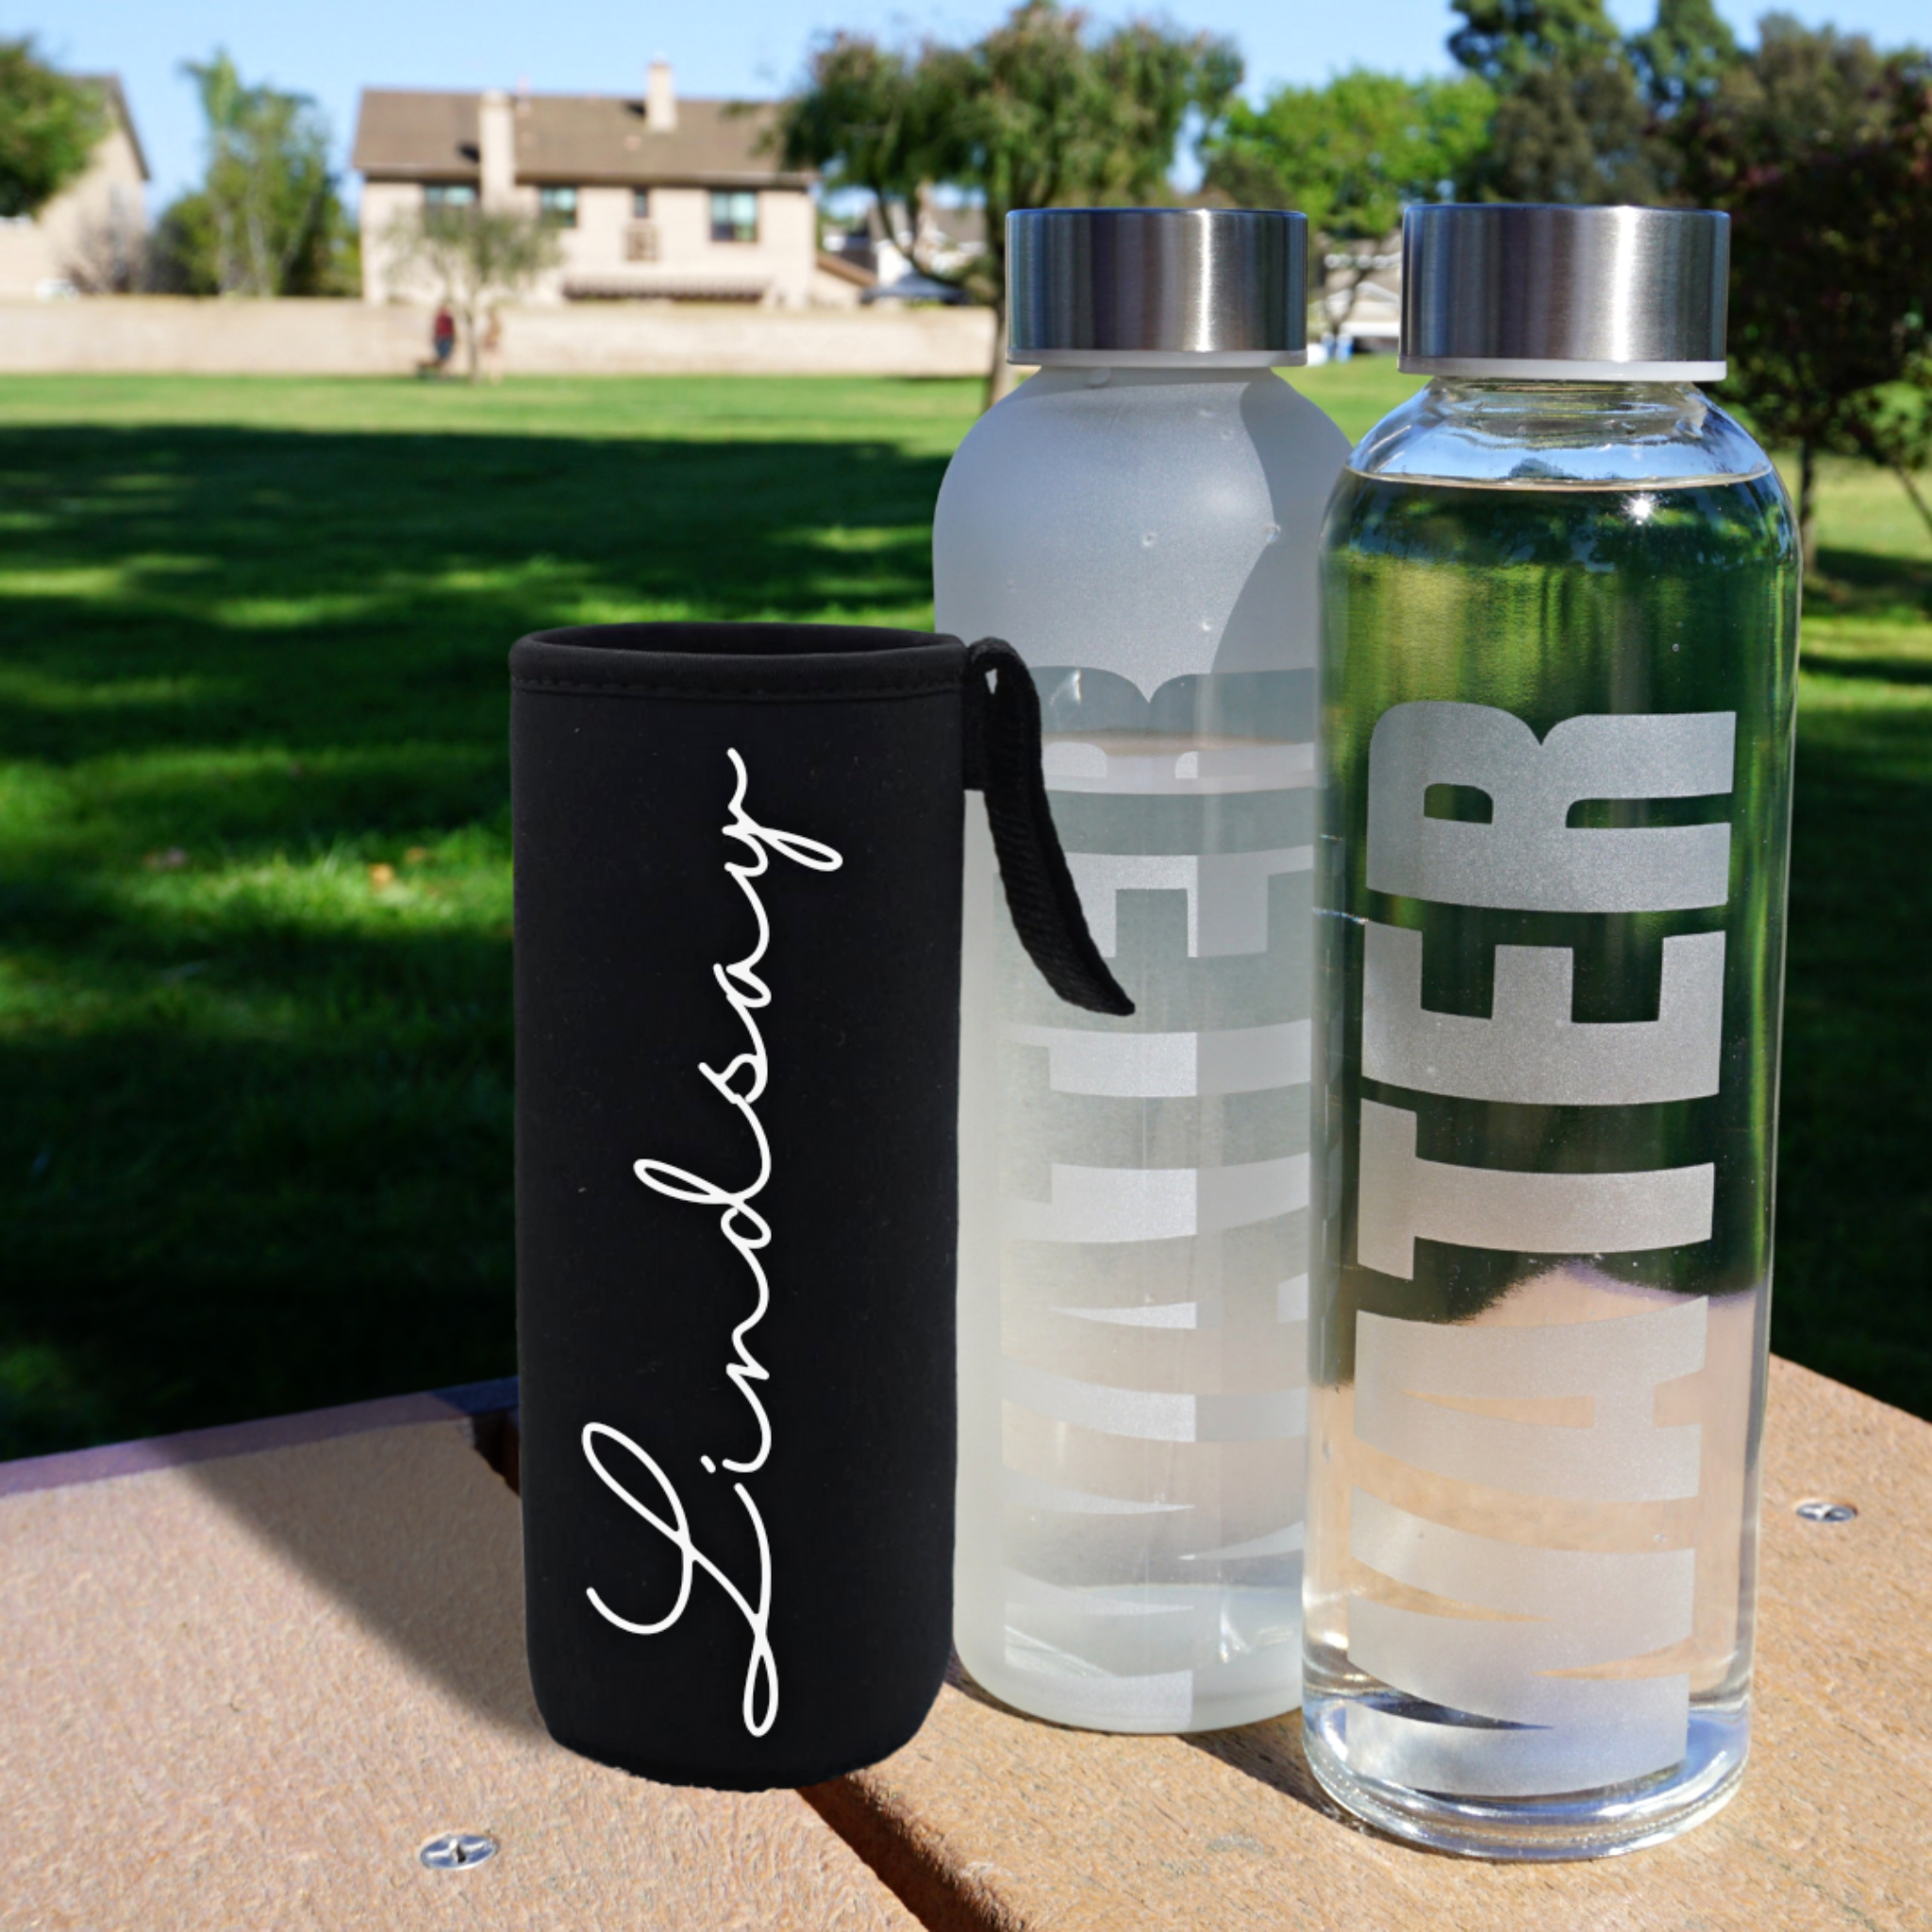 Custom Funny Quotes and Sayings Water Bottles - Laser Engraved